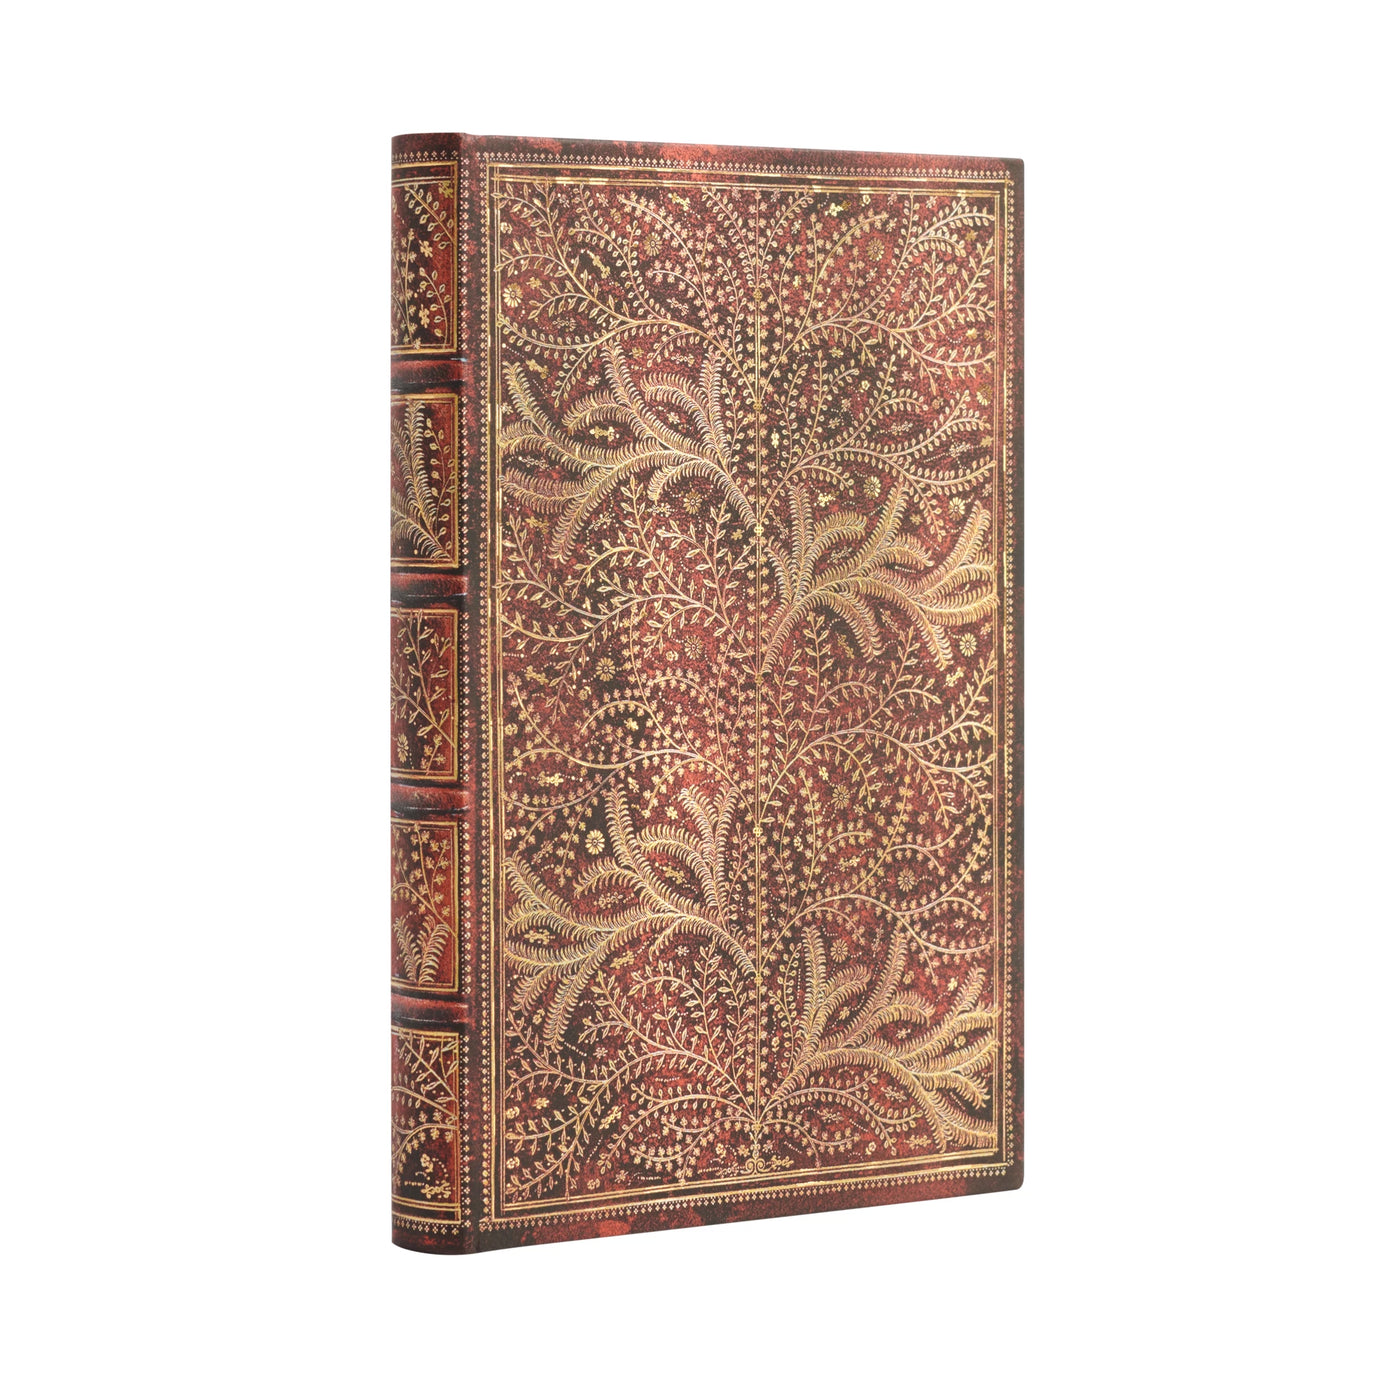 Paperblanks Wildwood Tree of Life  3.75 x 5.5 Inches Journal